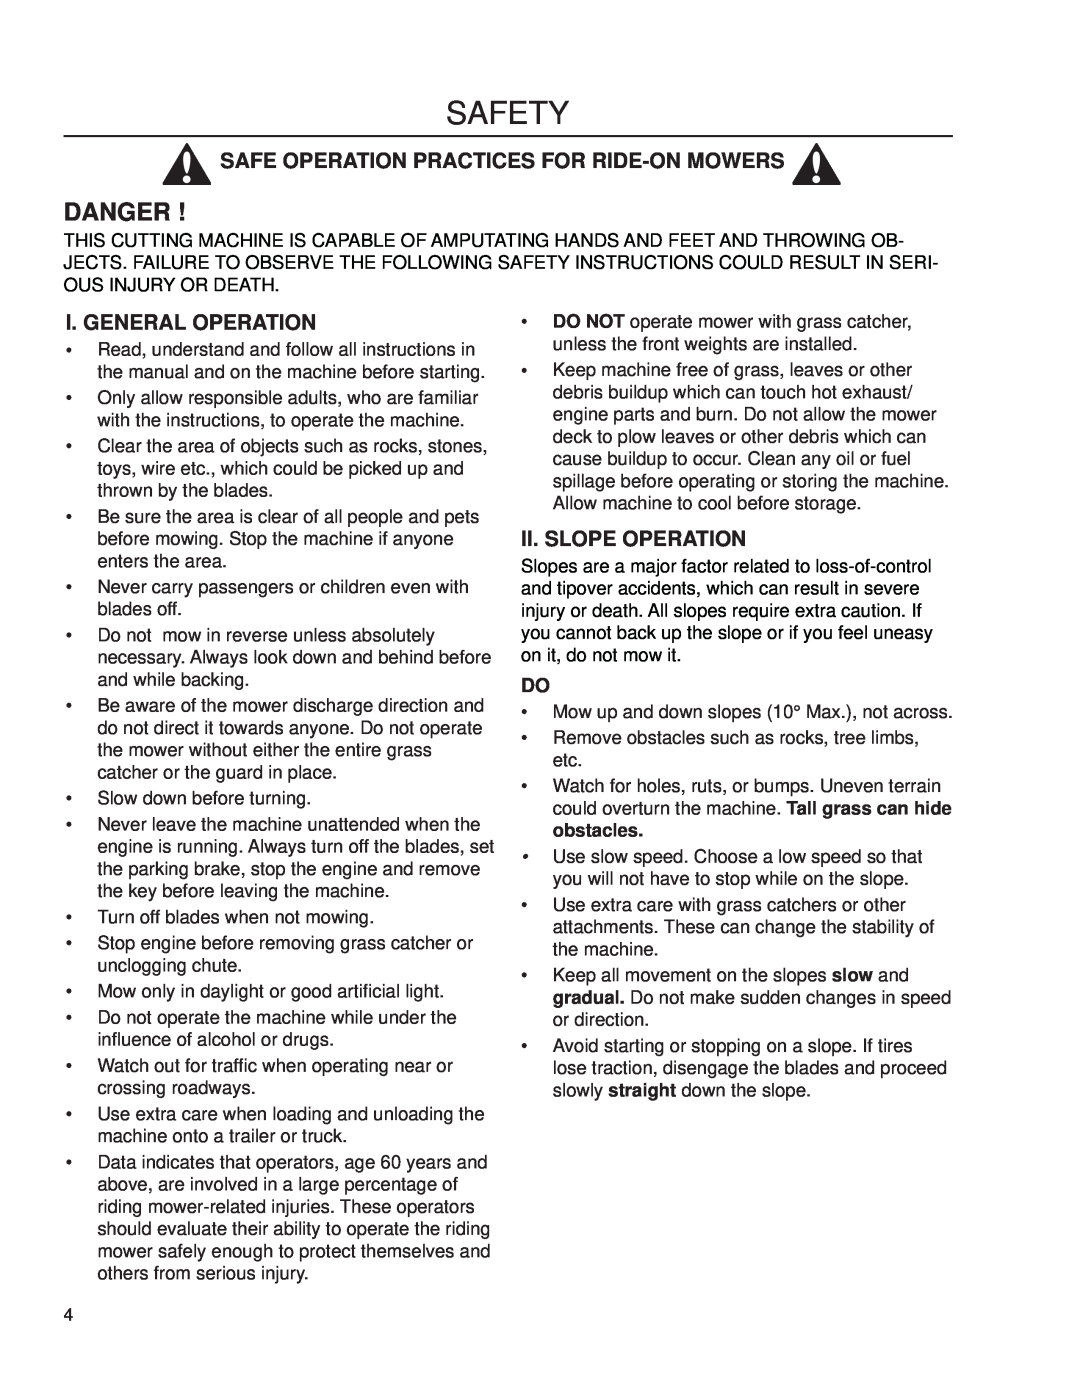 Dixon 539 132397 Safety, Danger, Safe Operation Practices For Ride-On Mowers, I. General Operation, Ii. Slope Operation 